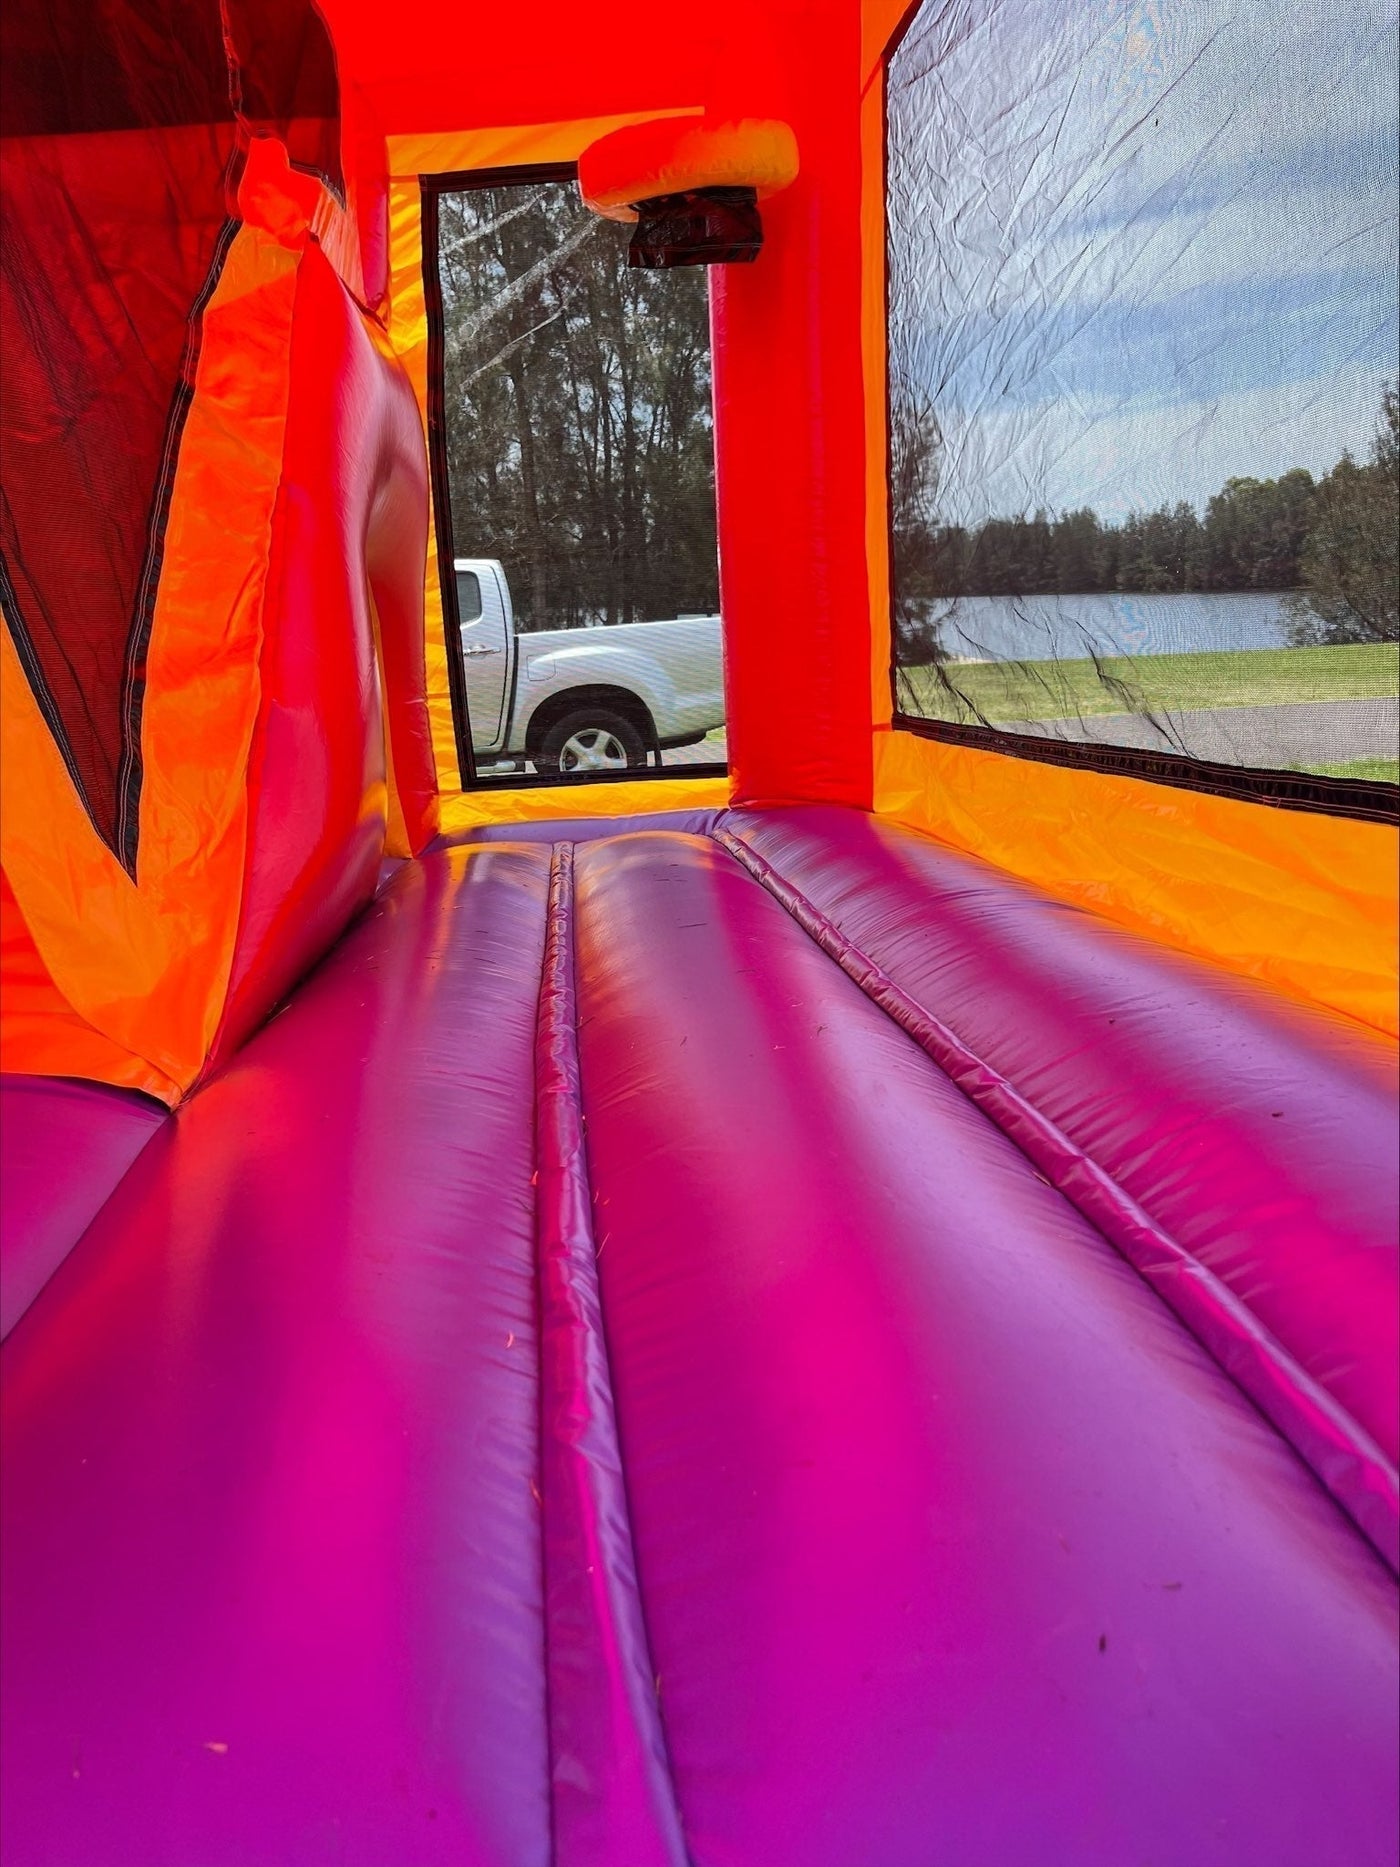 Giggle & Hoot Extra Large Obstacle Combo Jumping Castle